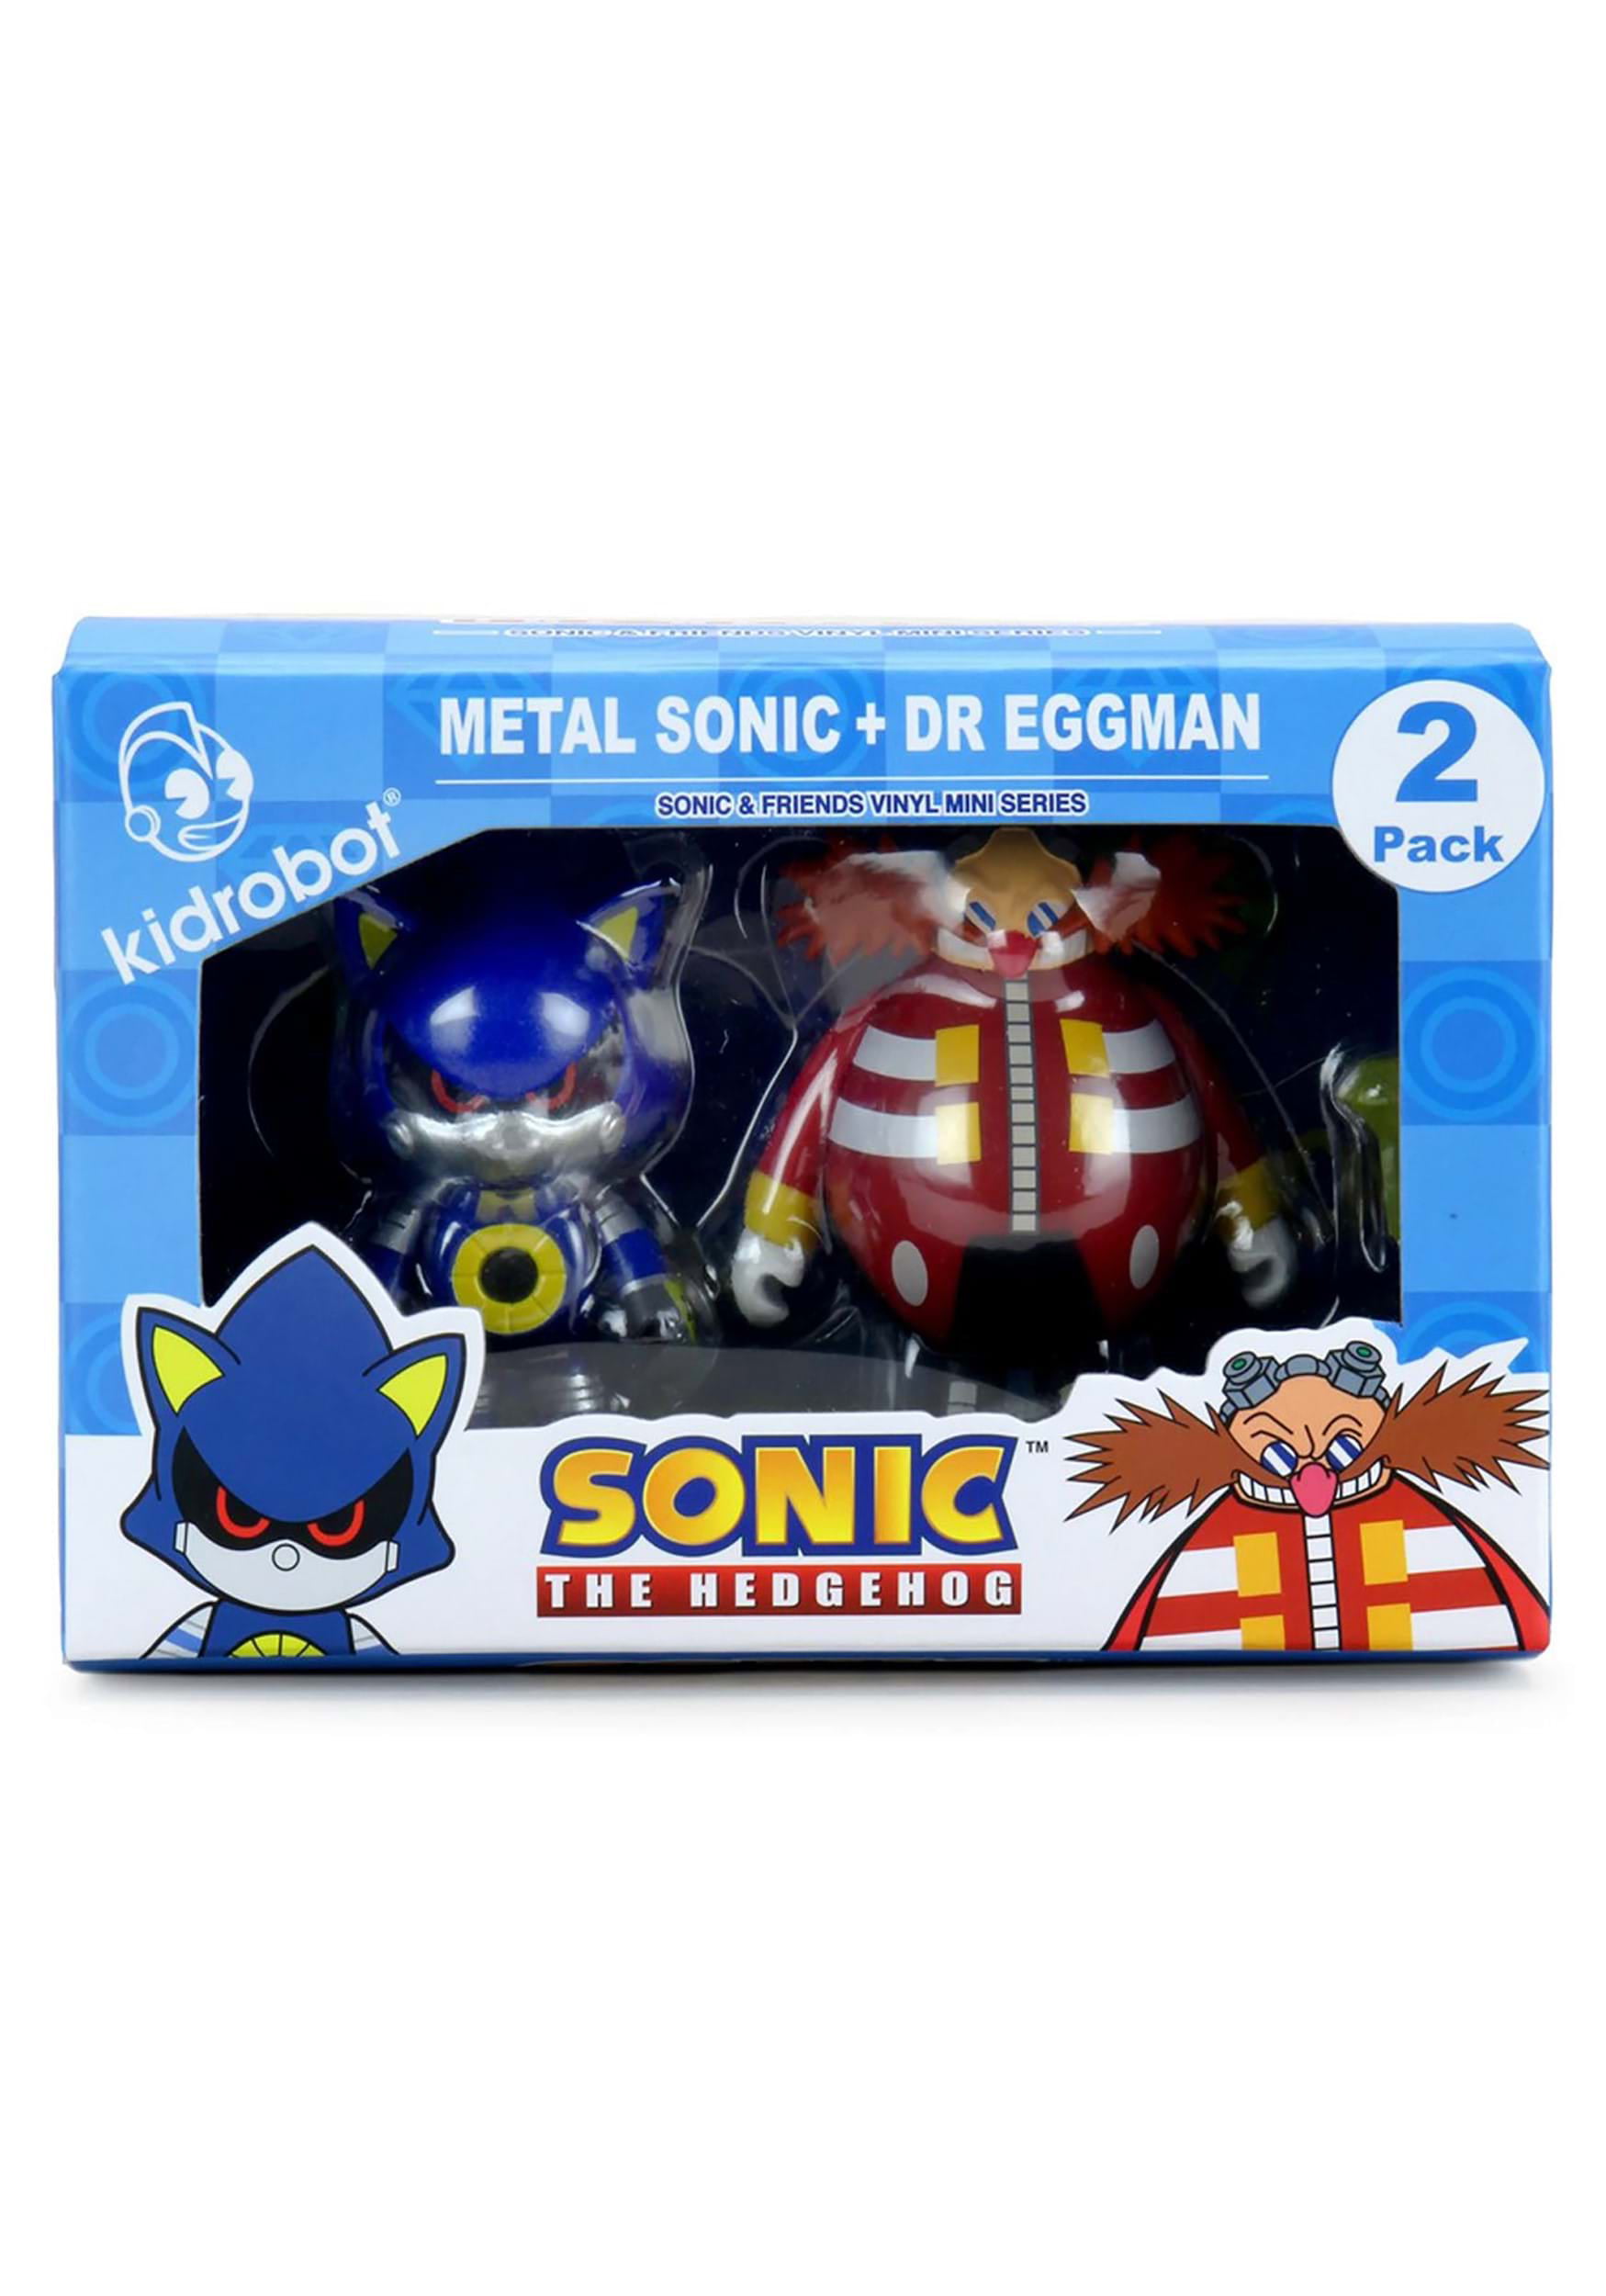 Sonic the Hedgehog 3 Vinyl Figure Sonic and Tails 2-Pack - Kidrobot